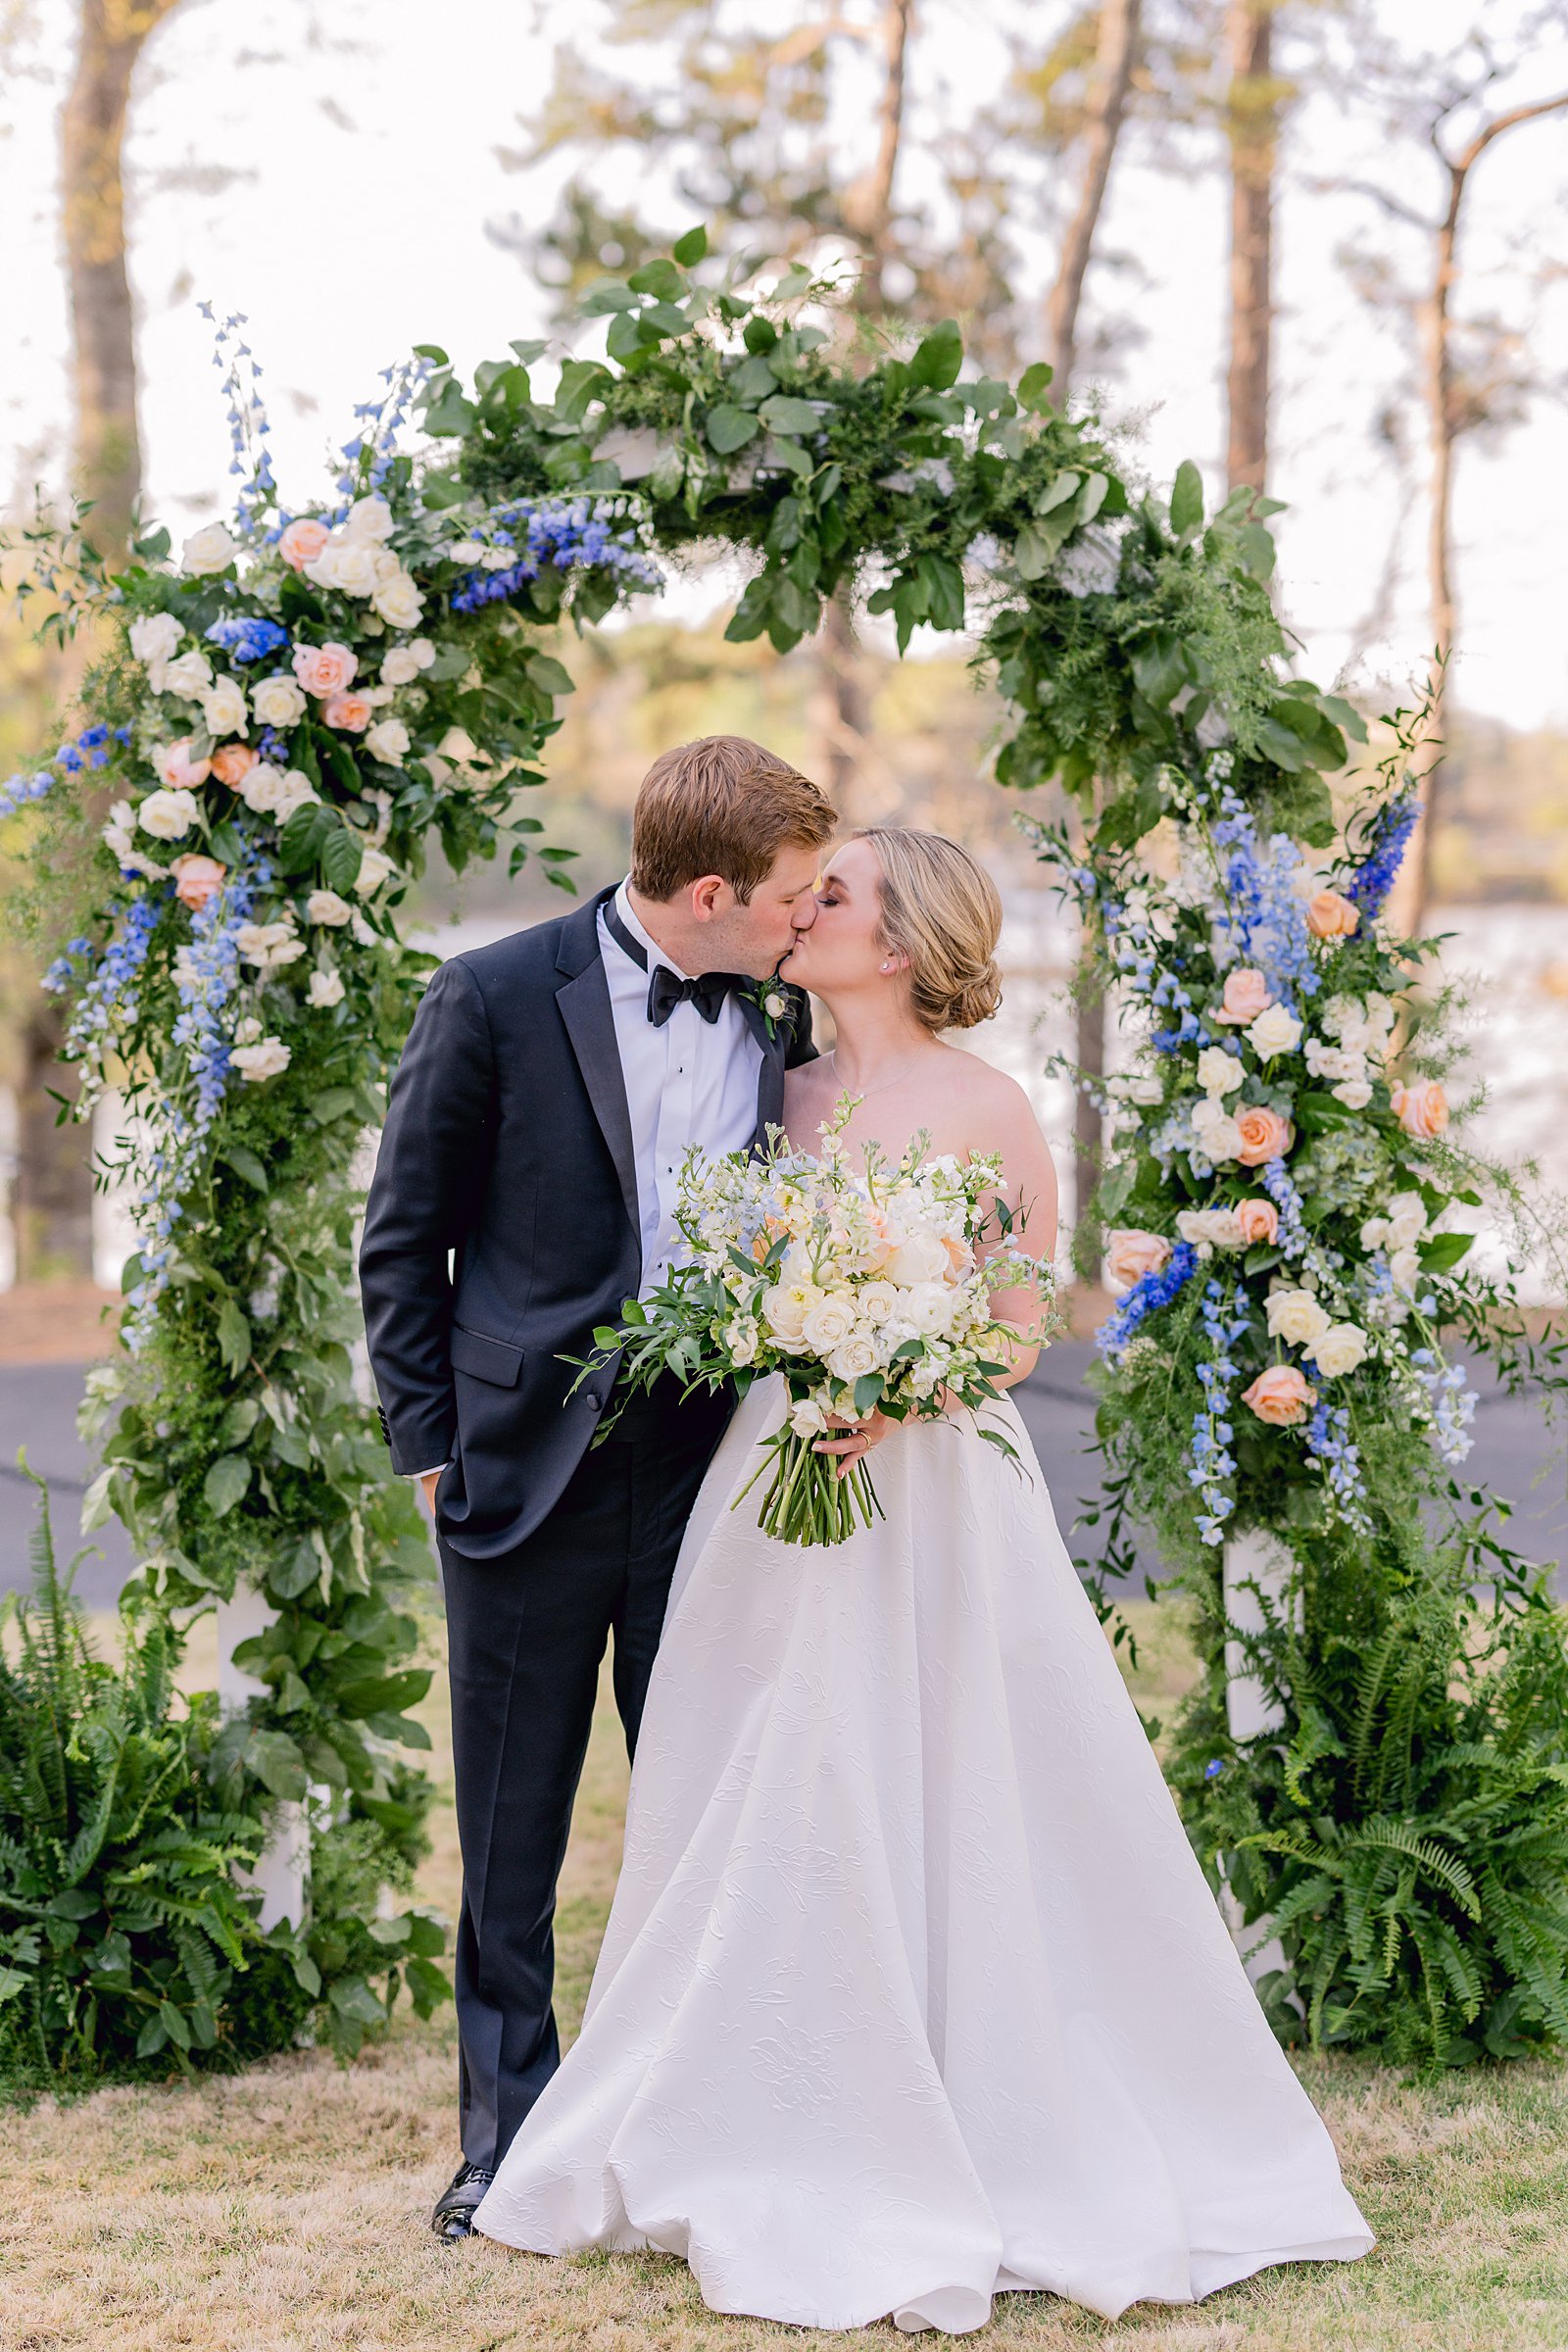 Outdoor Spring Wedding at the Big Eddy Club in Columbus, Ga kissing under a floral arch 